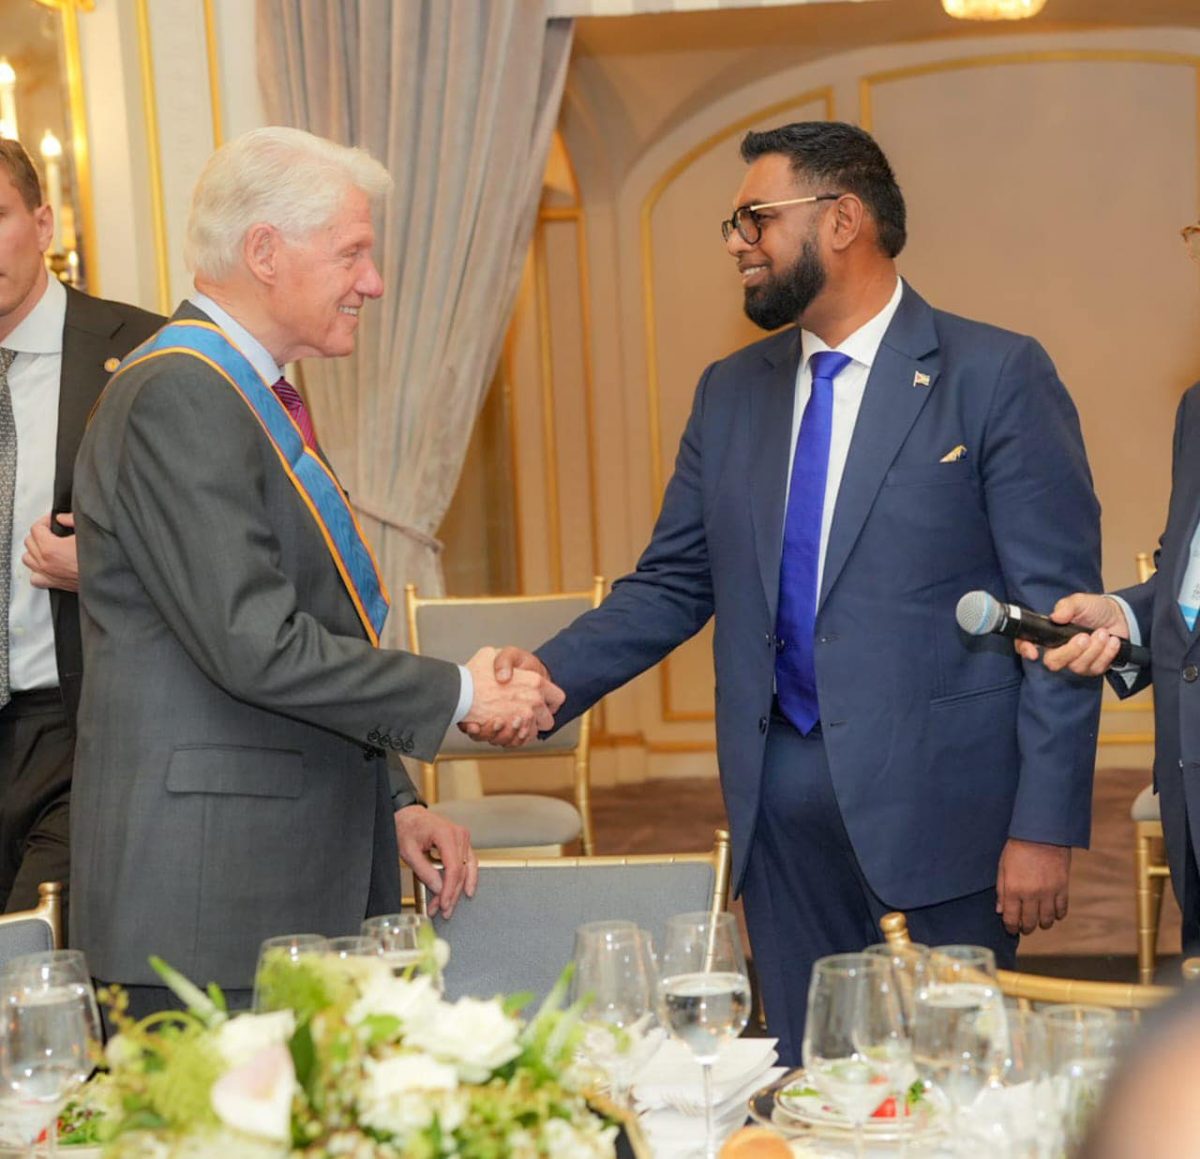 President Irfaan Ali attended a private reception last evening hosted by former United States President Bill Clinton, his wife, former Secretary of State Hillary Clinton, and their daughter Chelsea. A release from the Office of the President said that the  reception was attended by current and former Heads of State who are in New York for the United Nations General Assembly and a select group of Fortune 500 CEOs among others. On Tuesday, President Ali will address the 2023 meeting of the Clinton Global Initiative (CGI) in New York, the release said. In this Office of the President photo, President Irfaan Ali (right) greets former US President Bill Clinton.